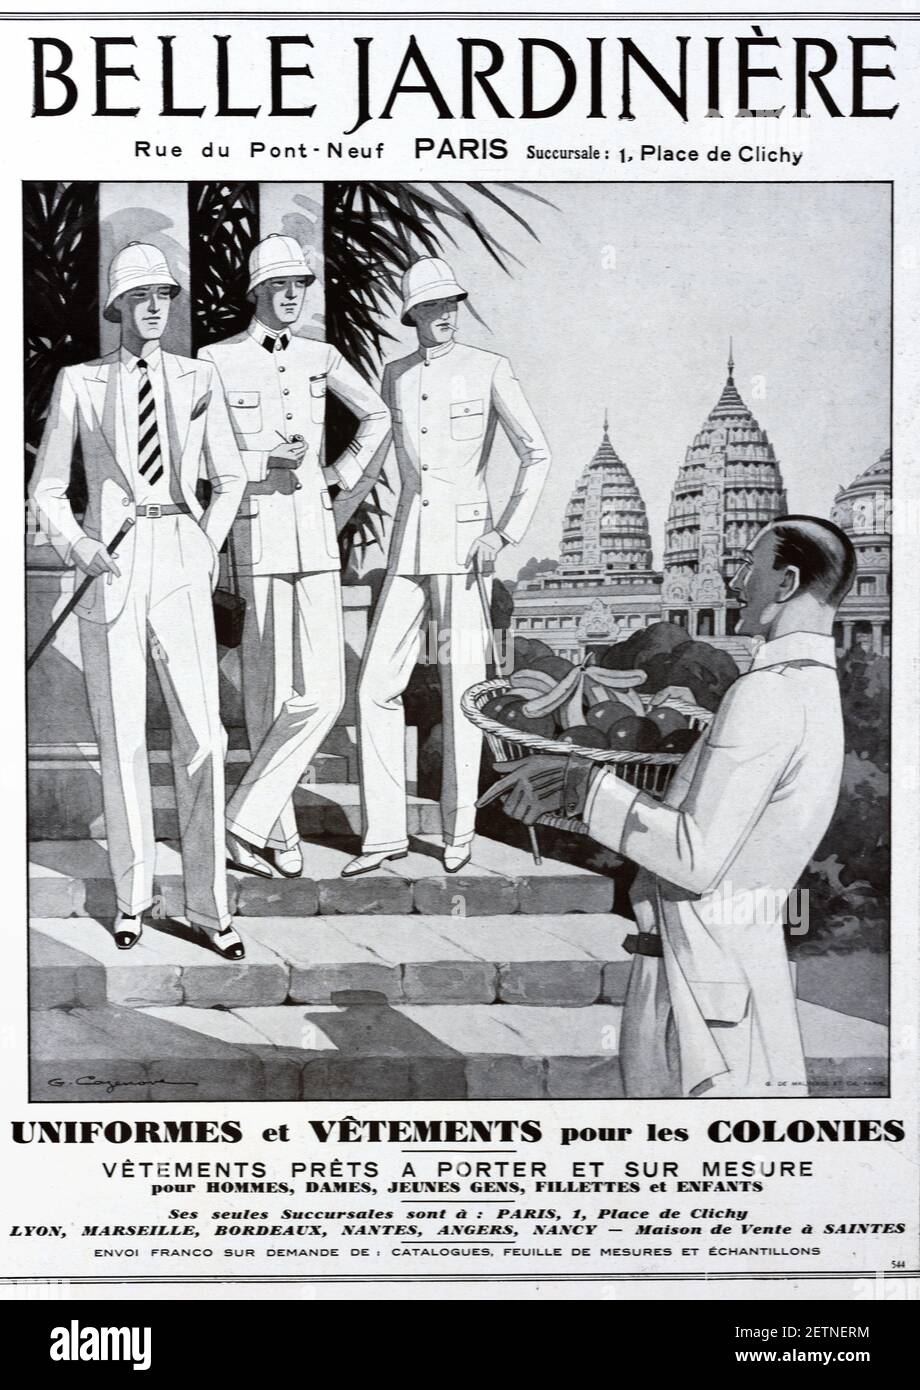 French Men Wearing Colonial Style Clothes or Colonial Clothing including Pith Helmets or Sola Topee Shot Against Background of Angkor Wat Temples Cambodia, then Indochina. Vintage Advert or Publicity for the up-market Belle Jardiniière Clothes Shop in Paris 1931 Stock Photo